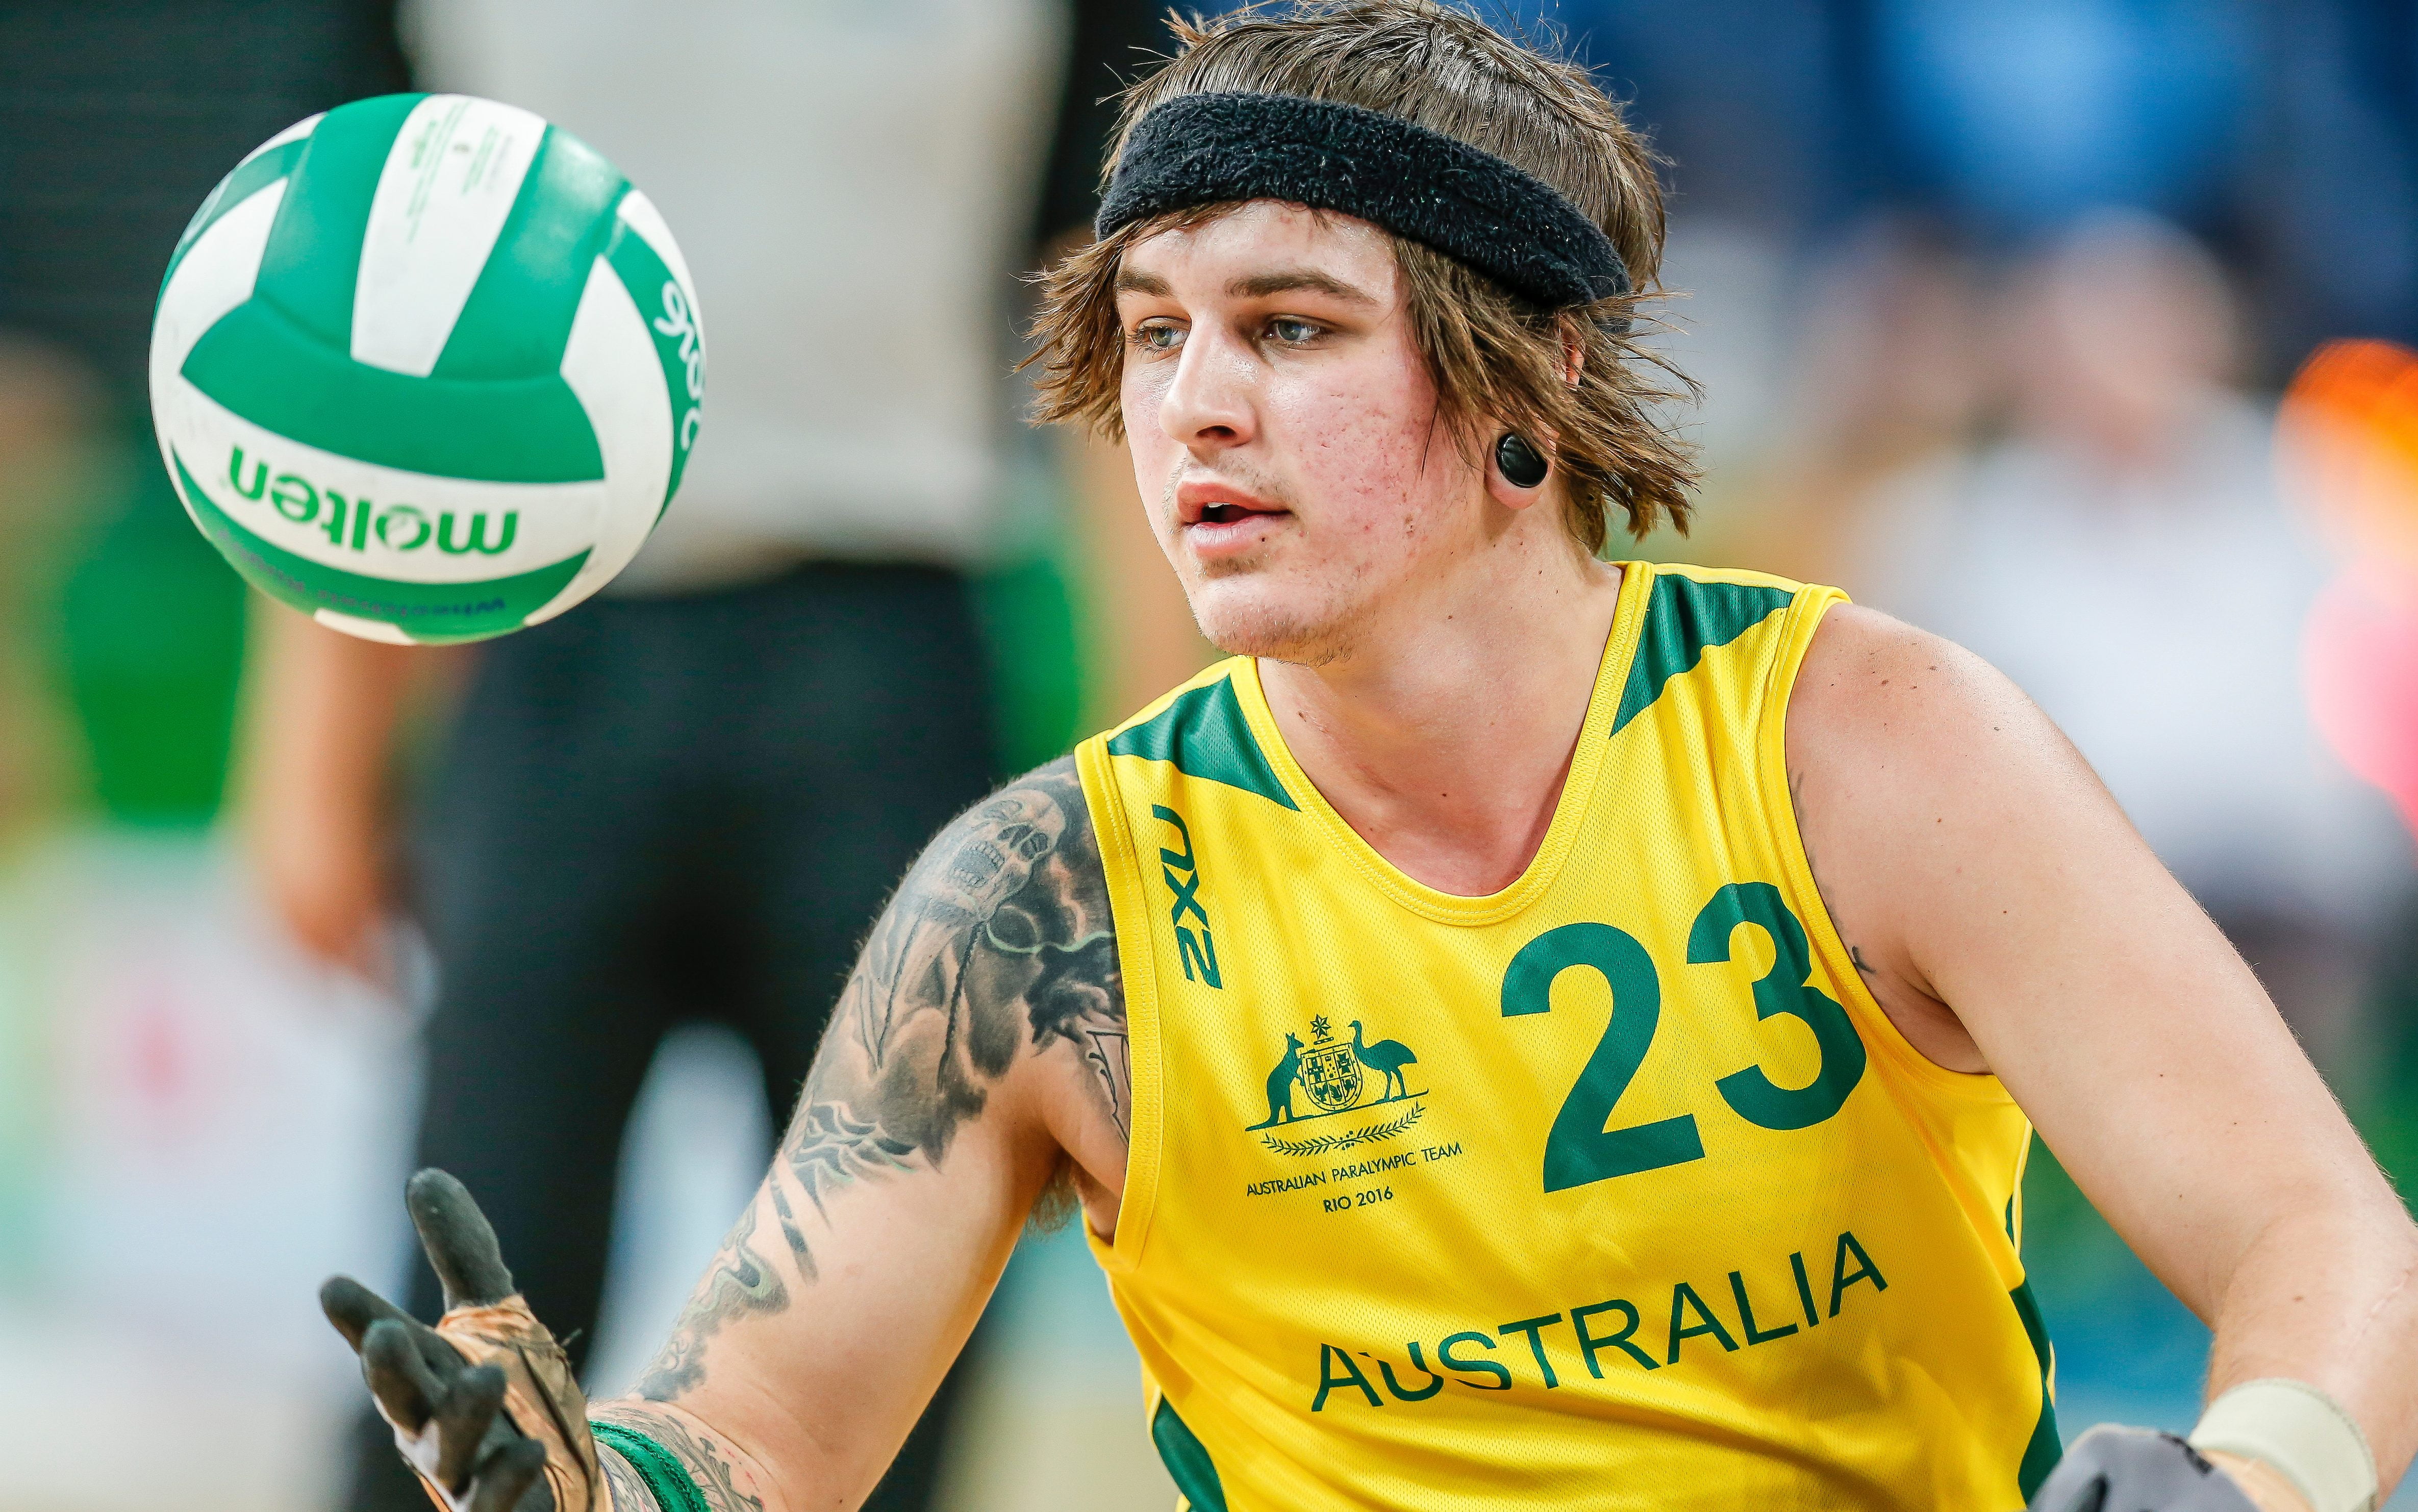 Australian Steelers crush Thailand in opening match of IWRF Asia Oceania Championship